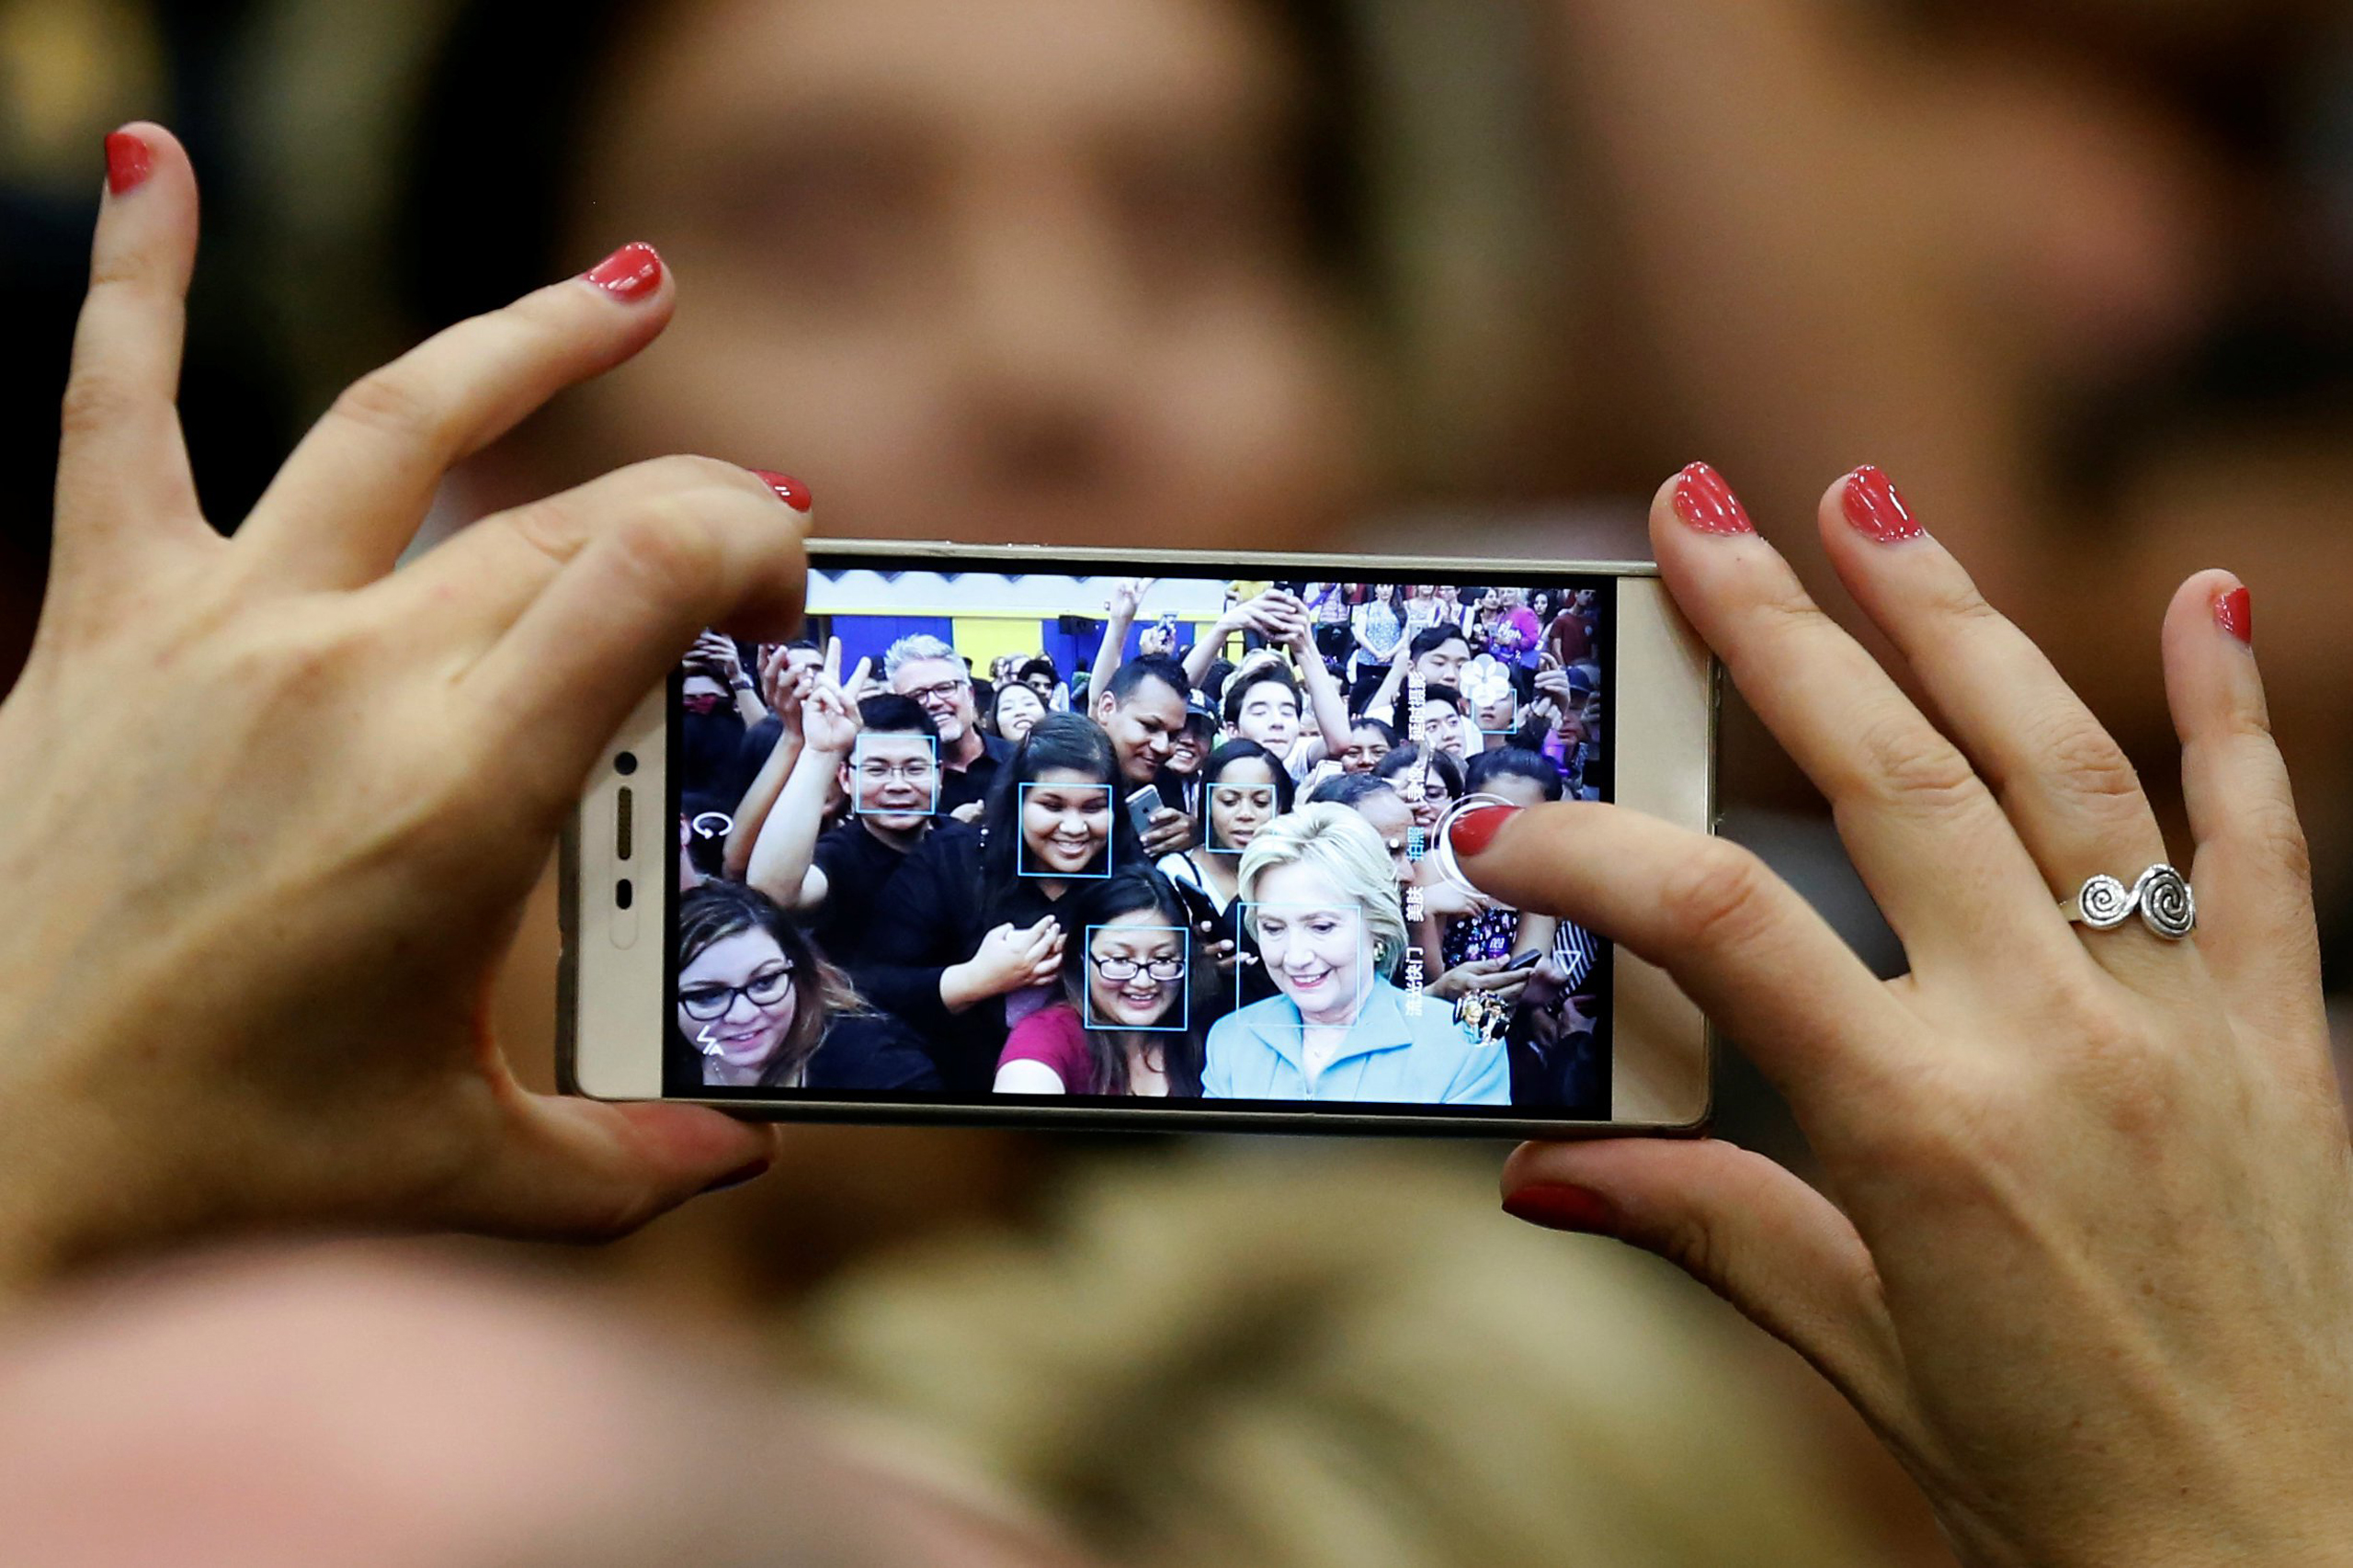 Democratic presidential candidate Hillary Clinton takes a selfie with supporters after speaking at the University of California Riverside in Riverside, Calif., on May 24, 2016. (Lucy Nicholson—Reuters)